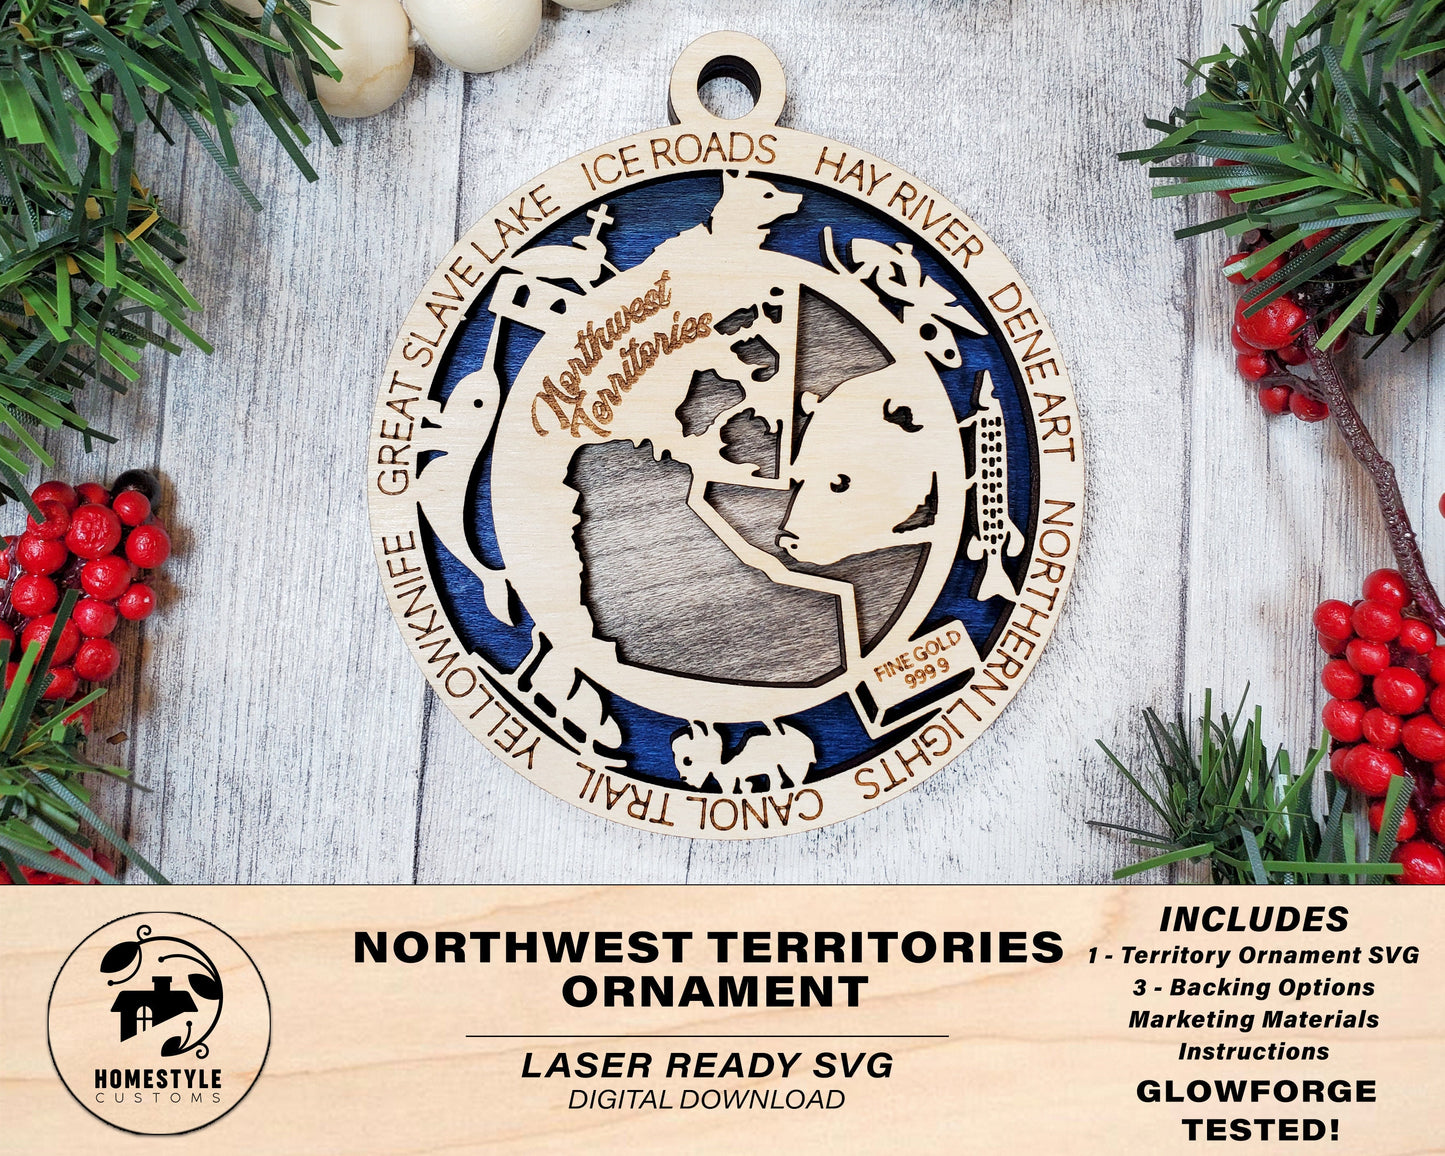 Northwest Territories Ornament - Canada - SVG File Download - Sized for Glowforge - Laser Ready Digital Files